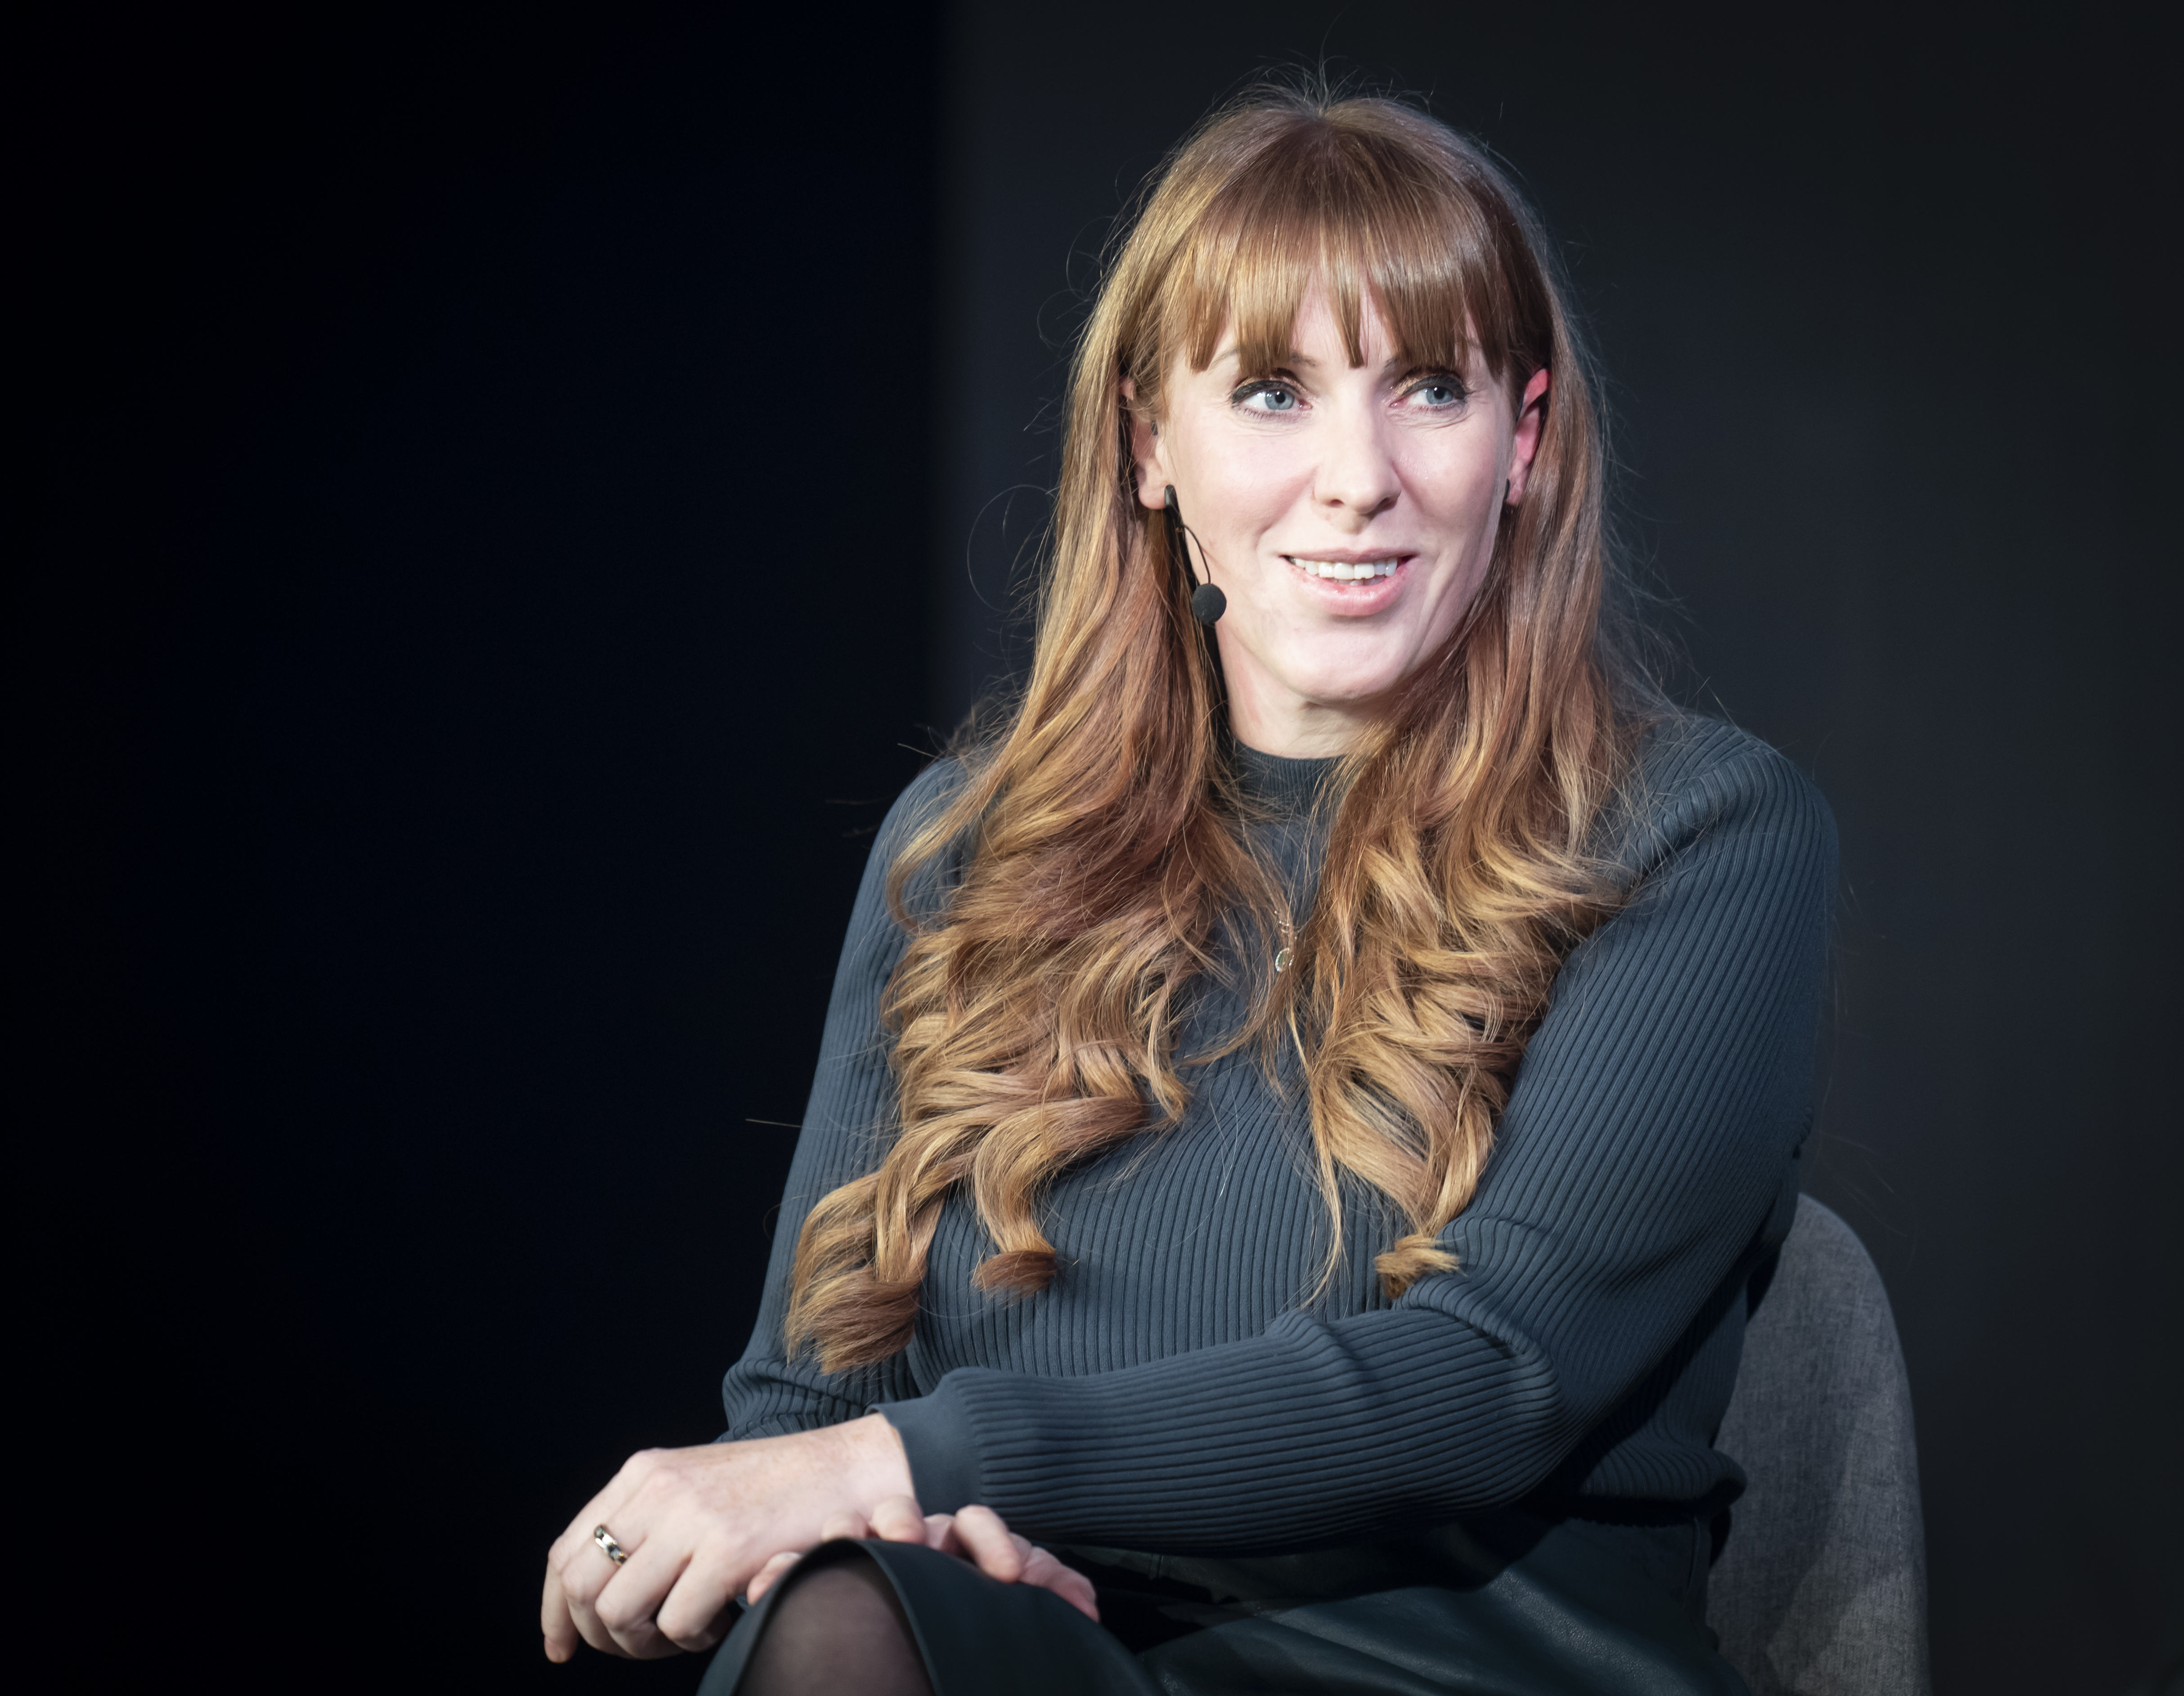 Angela Rayner must face a full police probe into her council house tax row, a former ethics chief has demanded